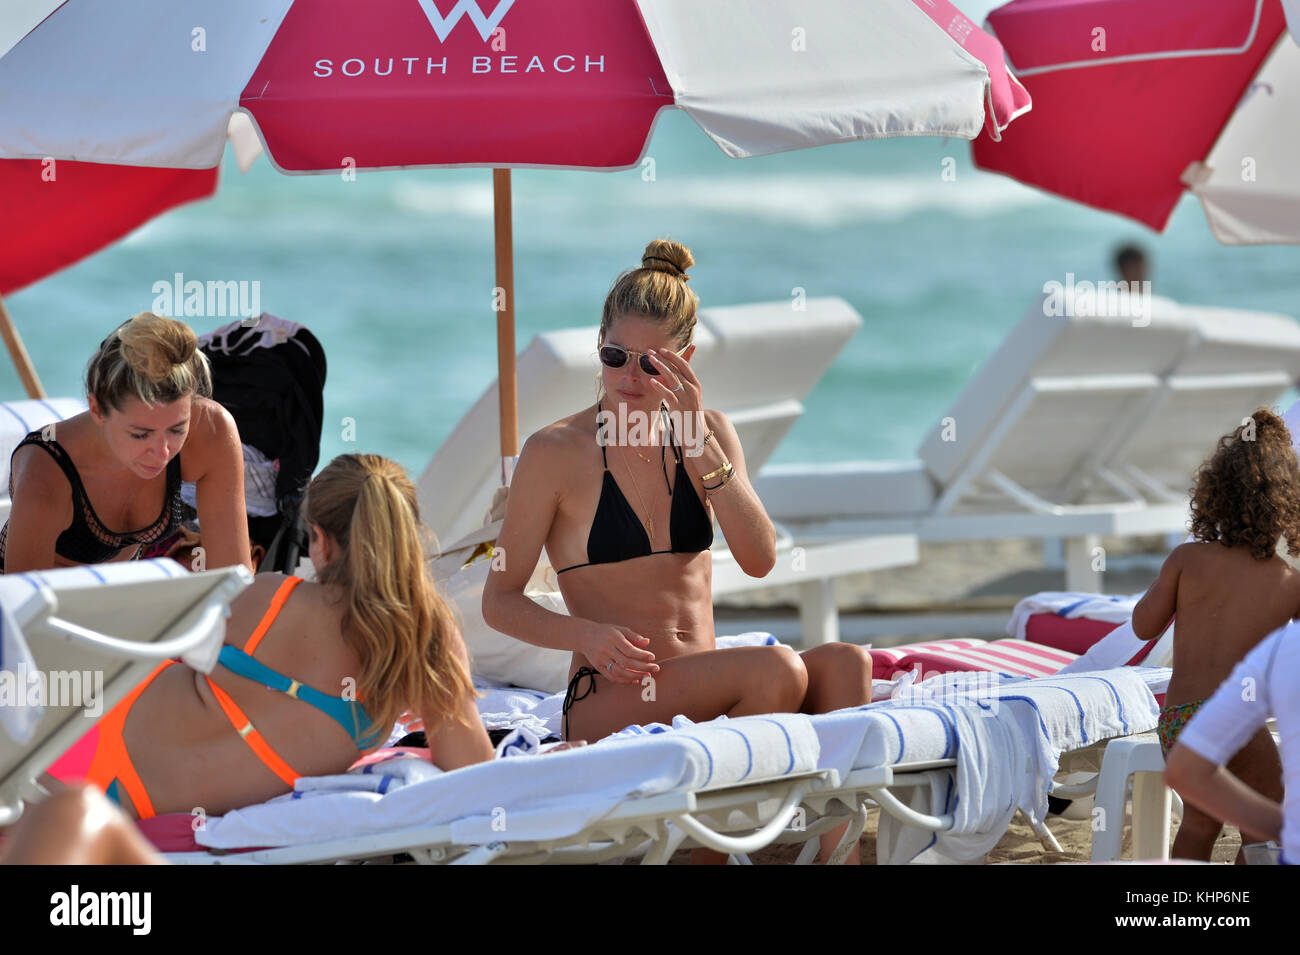 MIAMI, FL - JANUARY 03: Victoria's Secret supermodel Doutzen Kroes looks like she's on her last nerve when her kids looked like they were having temper tantrums at the beach. Doutzen was wearing a skimpy black triangle string bikini as she tried to hold it together and cheer up, her son Phyllon, five, and daughter Myllena. A few minuets later the family left the beach perhaps for a much needed nap for everyone on January 3, 2017 in Miami  Florida  People:  Doutzen Kroes Stock Photo